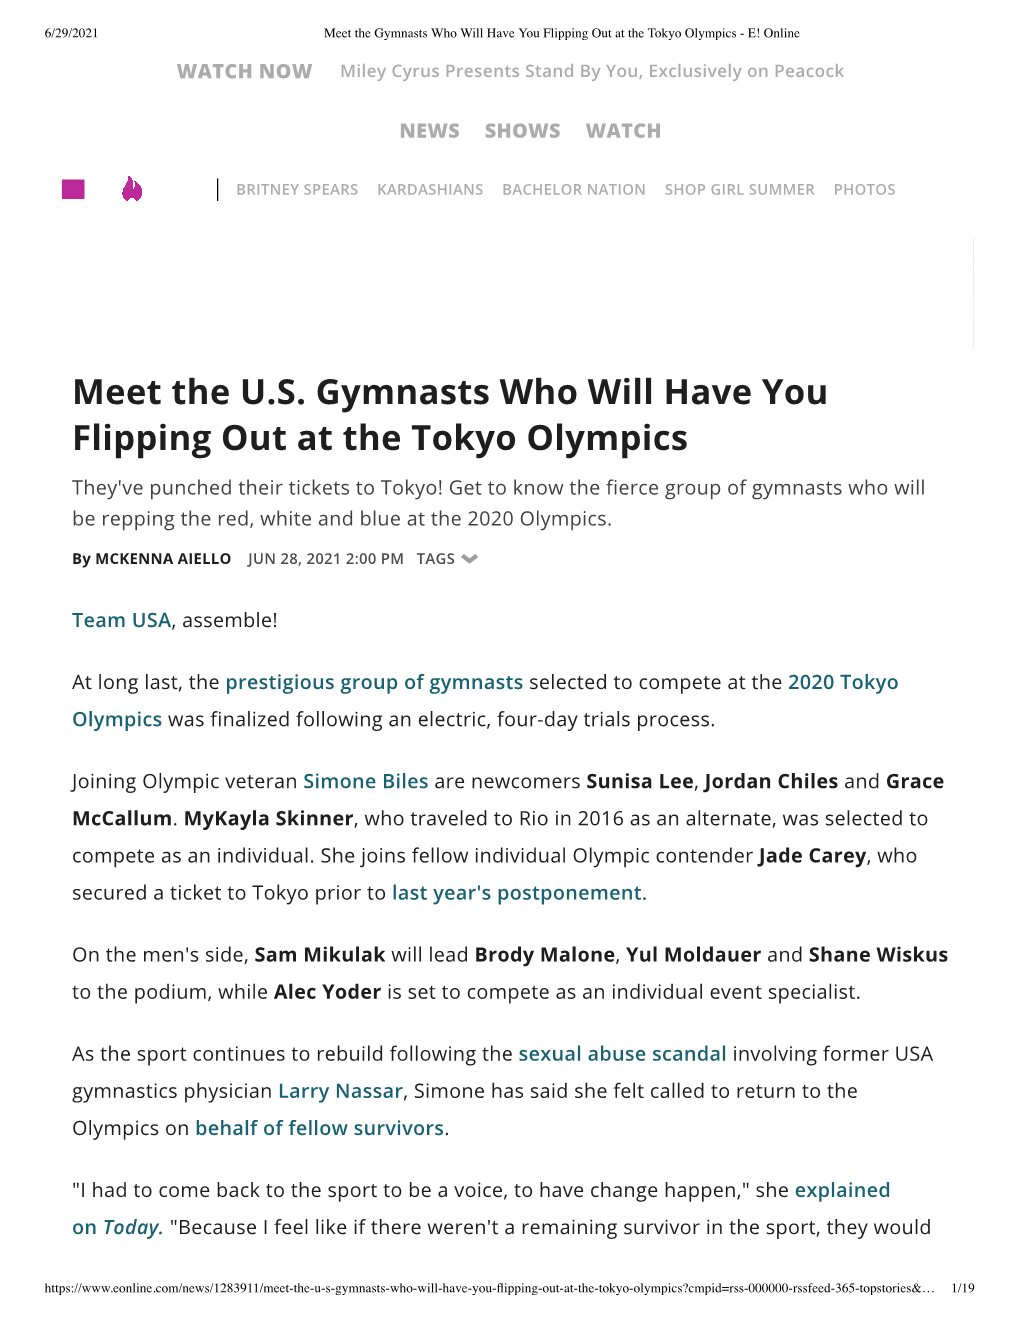 Meet the Gymnasts Who Will Have You Fli... out at The